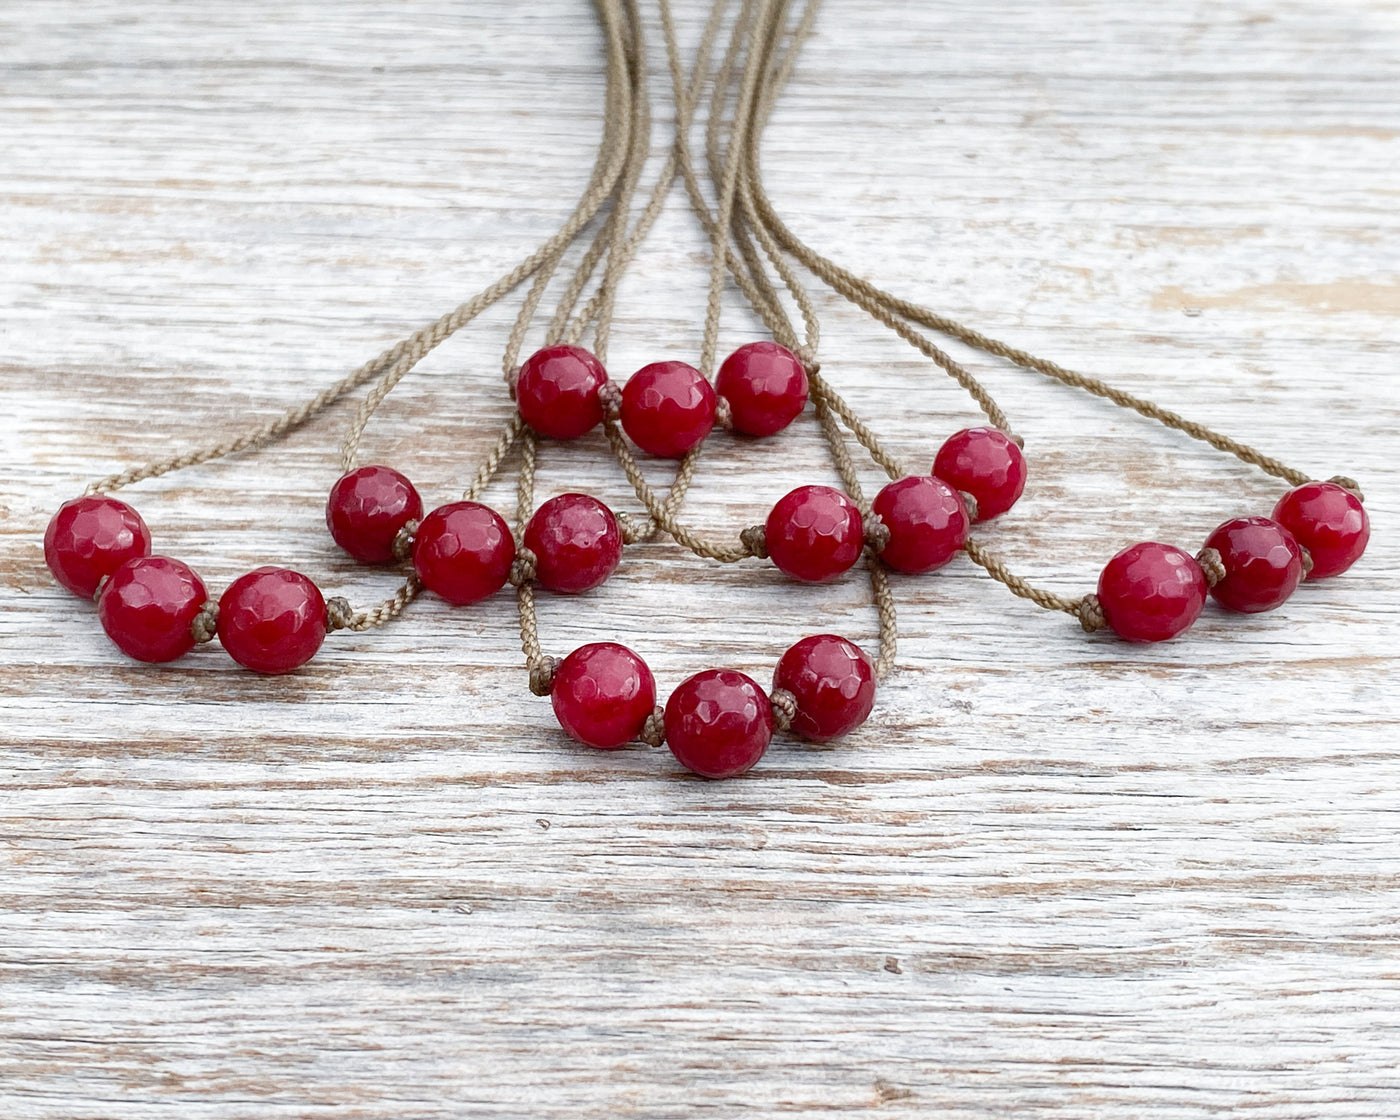 Triple Knotted Necklace-0536-Ruby Jade Round Medium